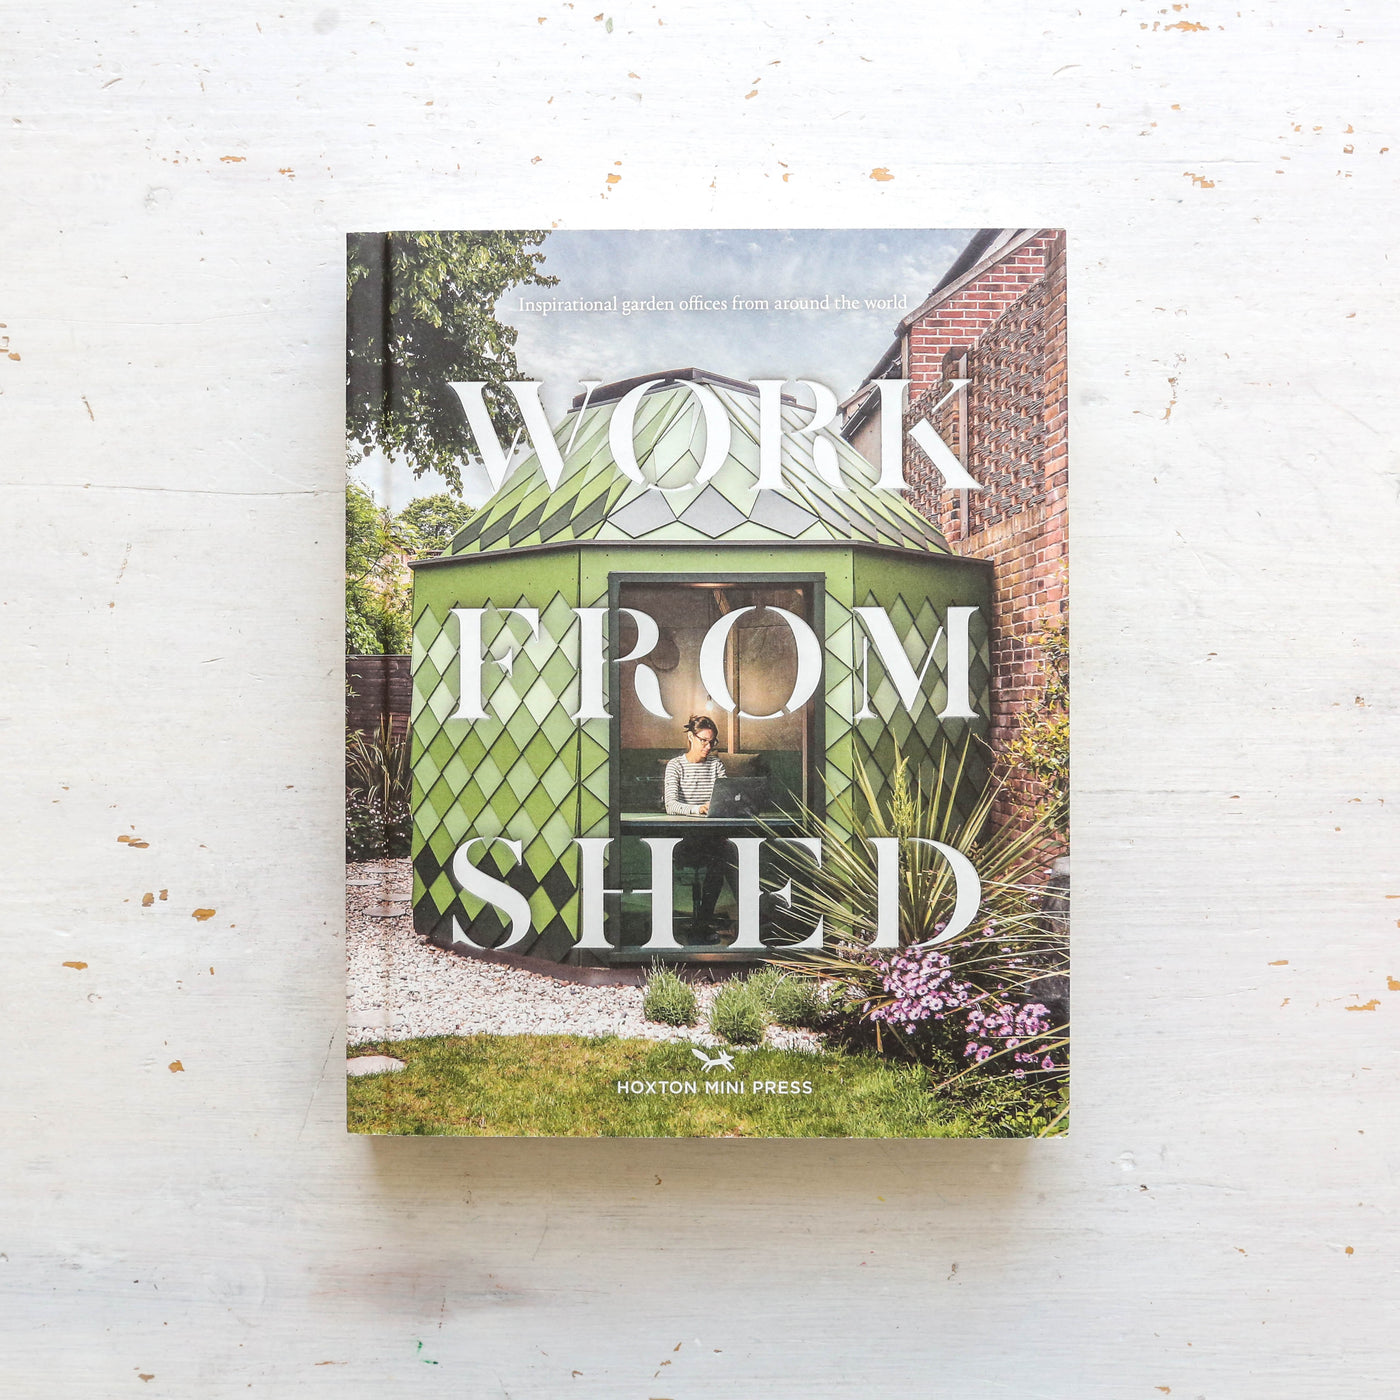 Work From Shed - Hoxton Mini Press Book